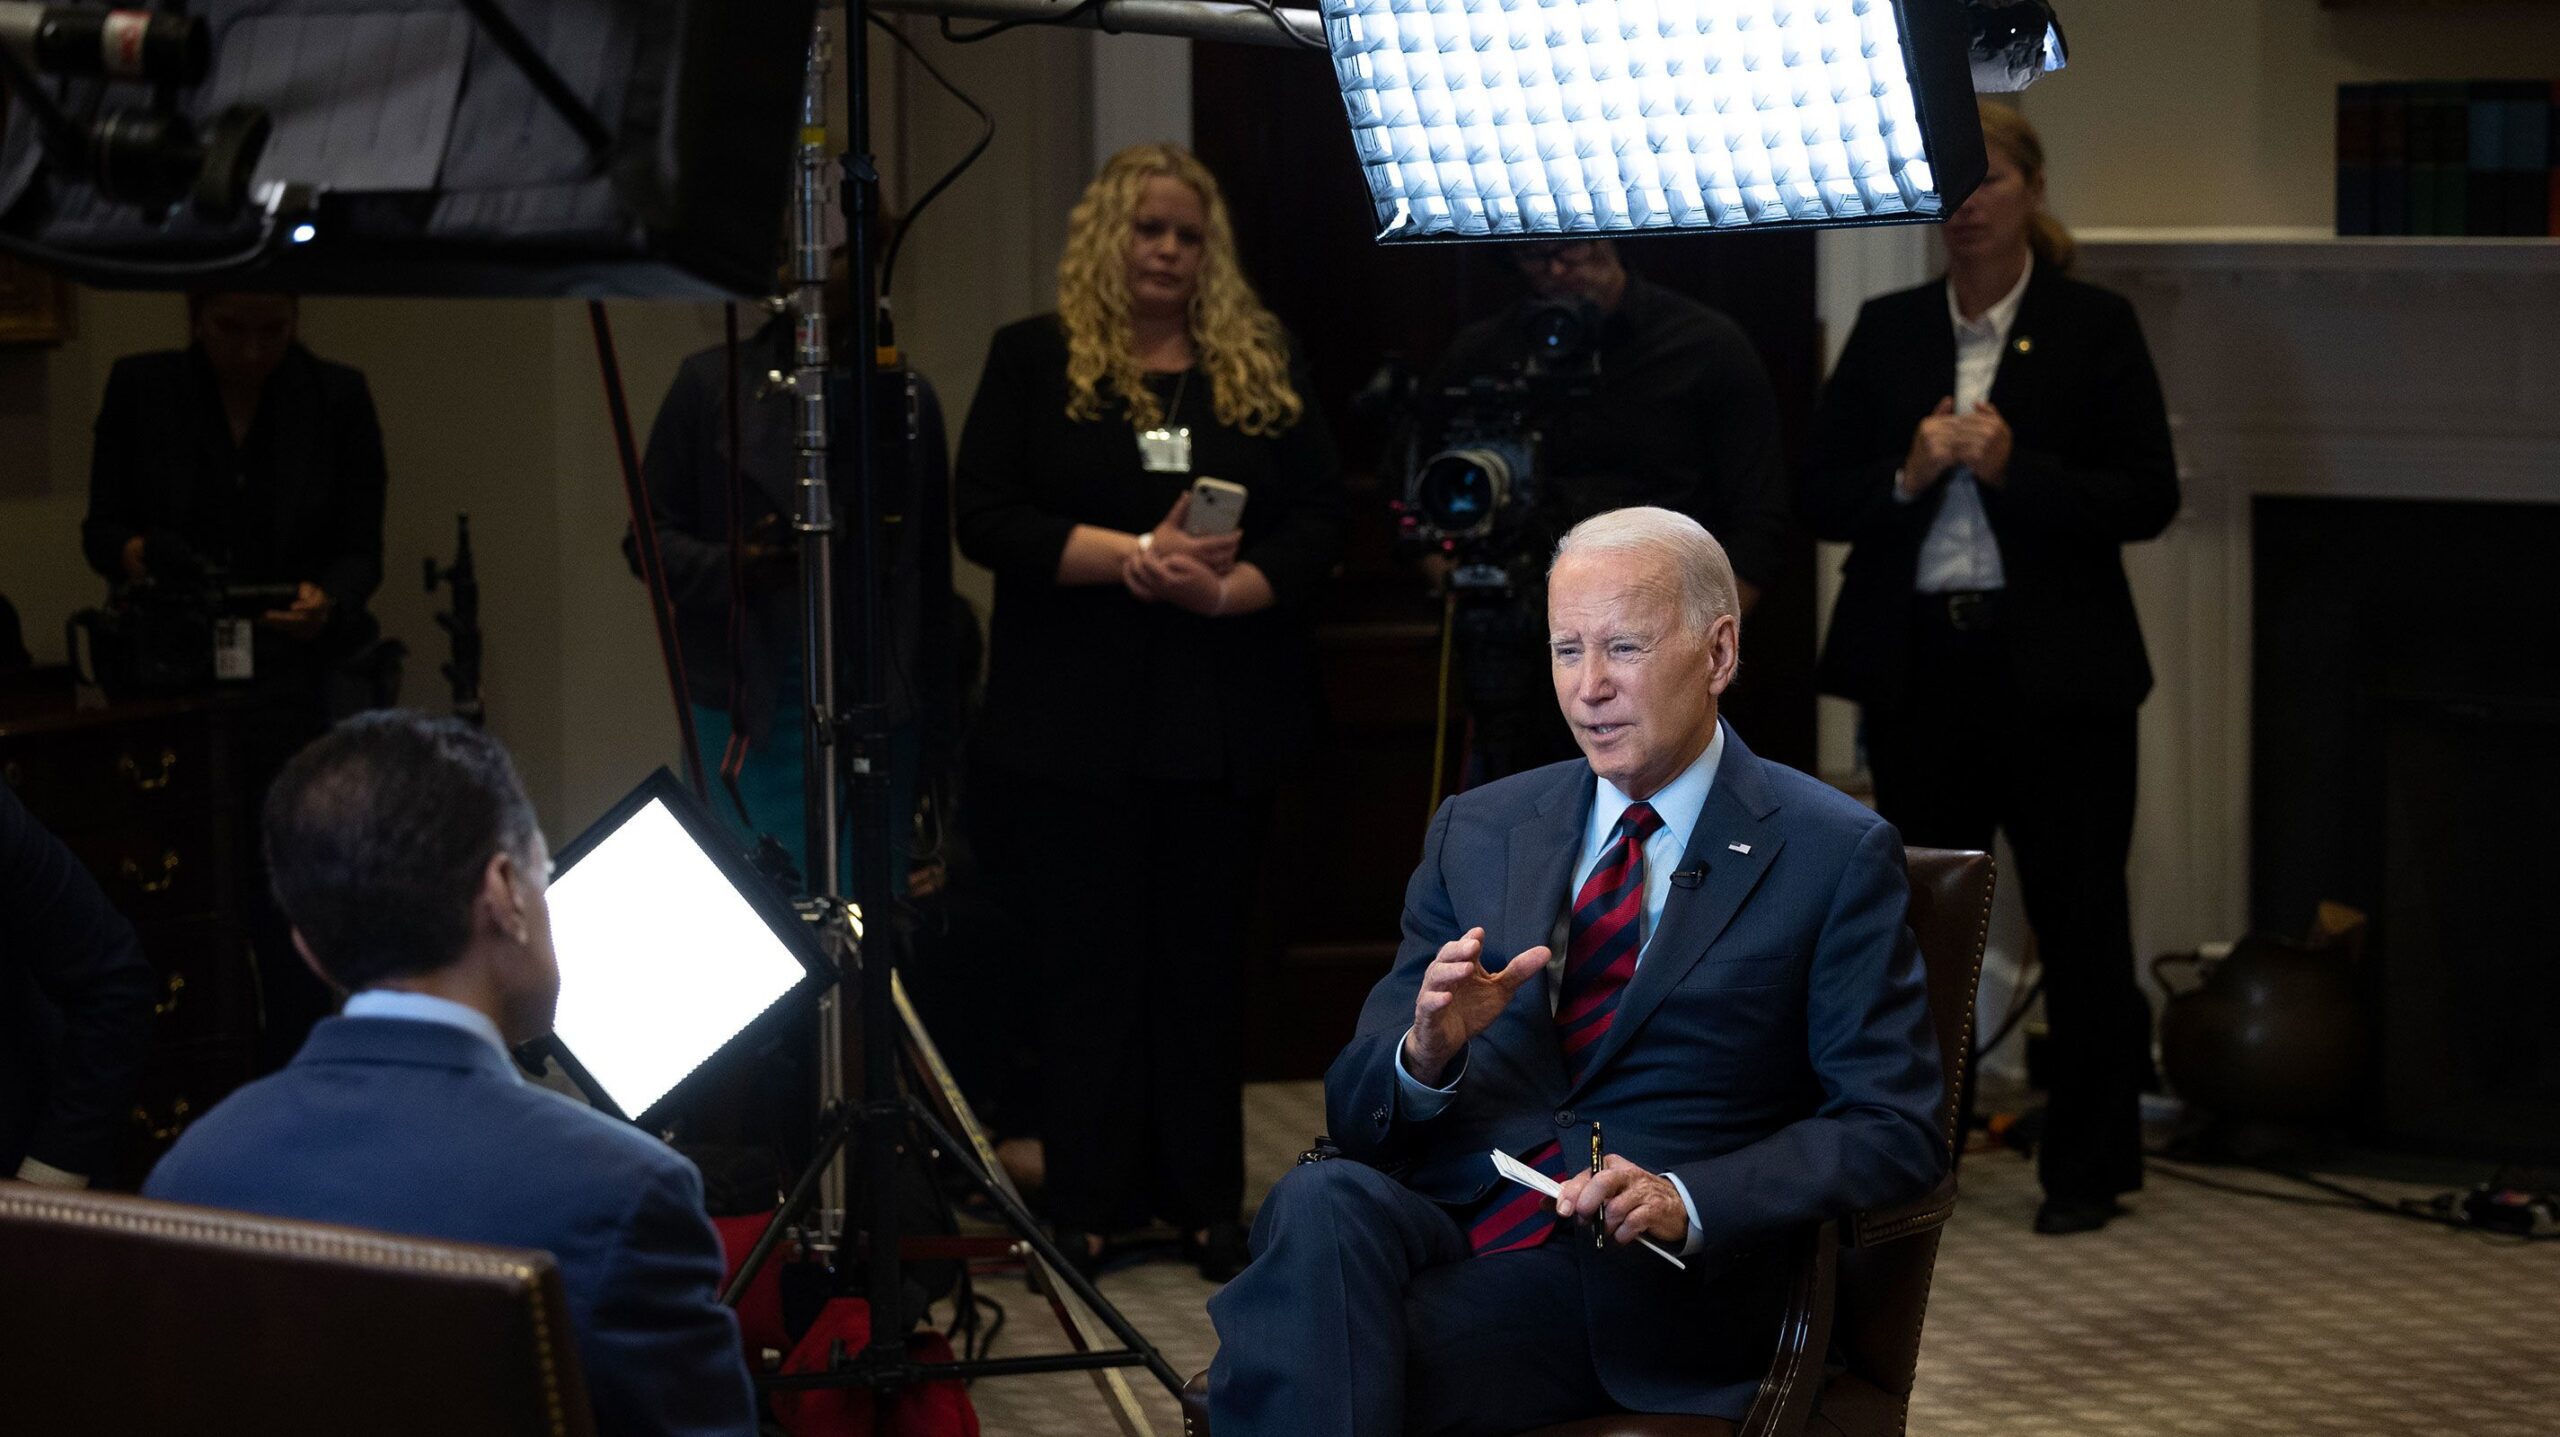 President Joe Biden speaks with CNN's Fareed Zakaria during a televised interview inside the Roosev...